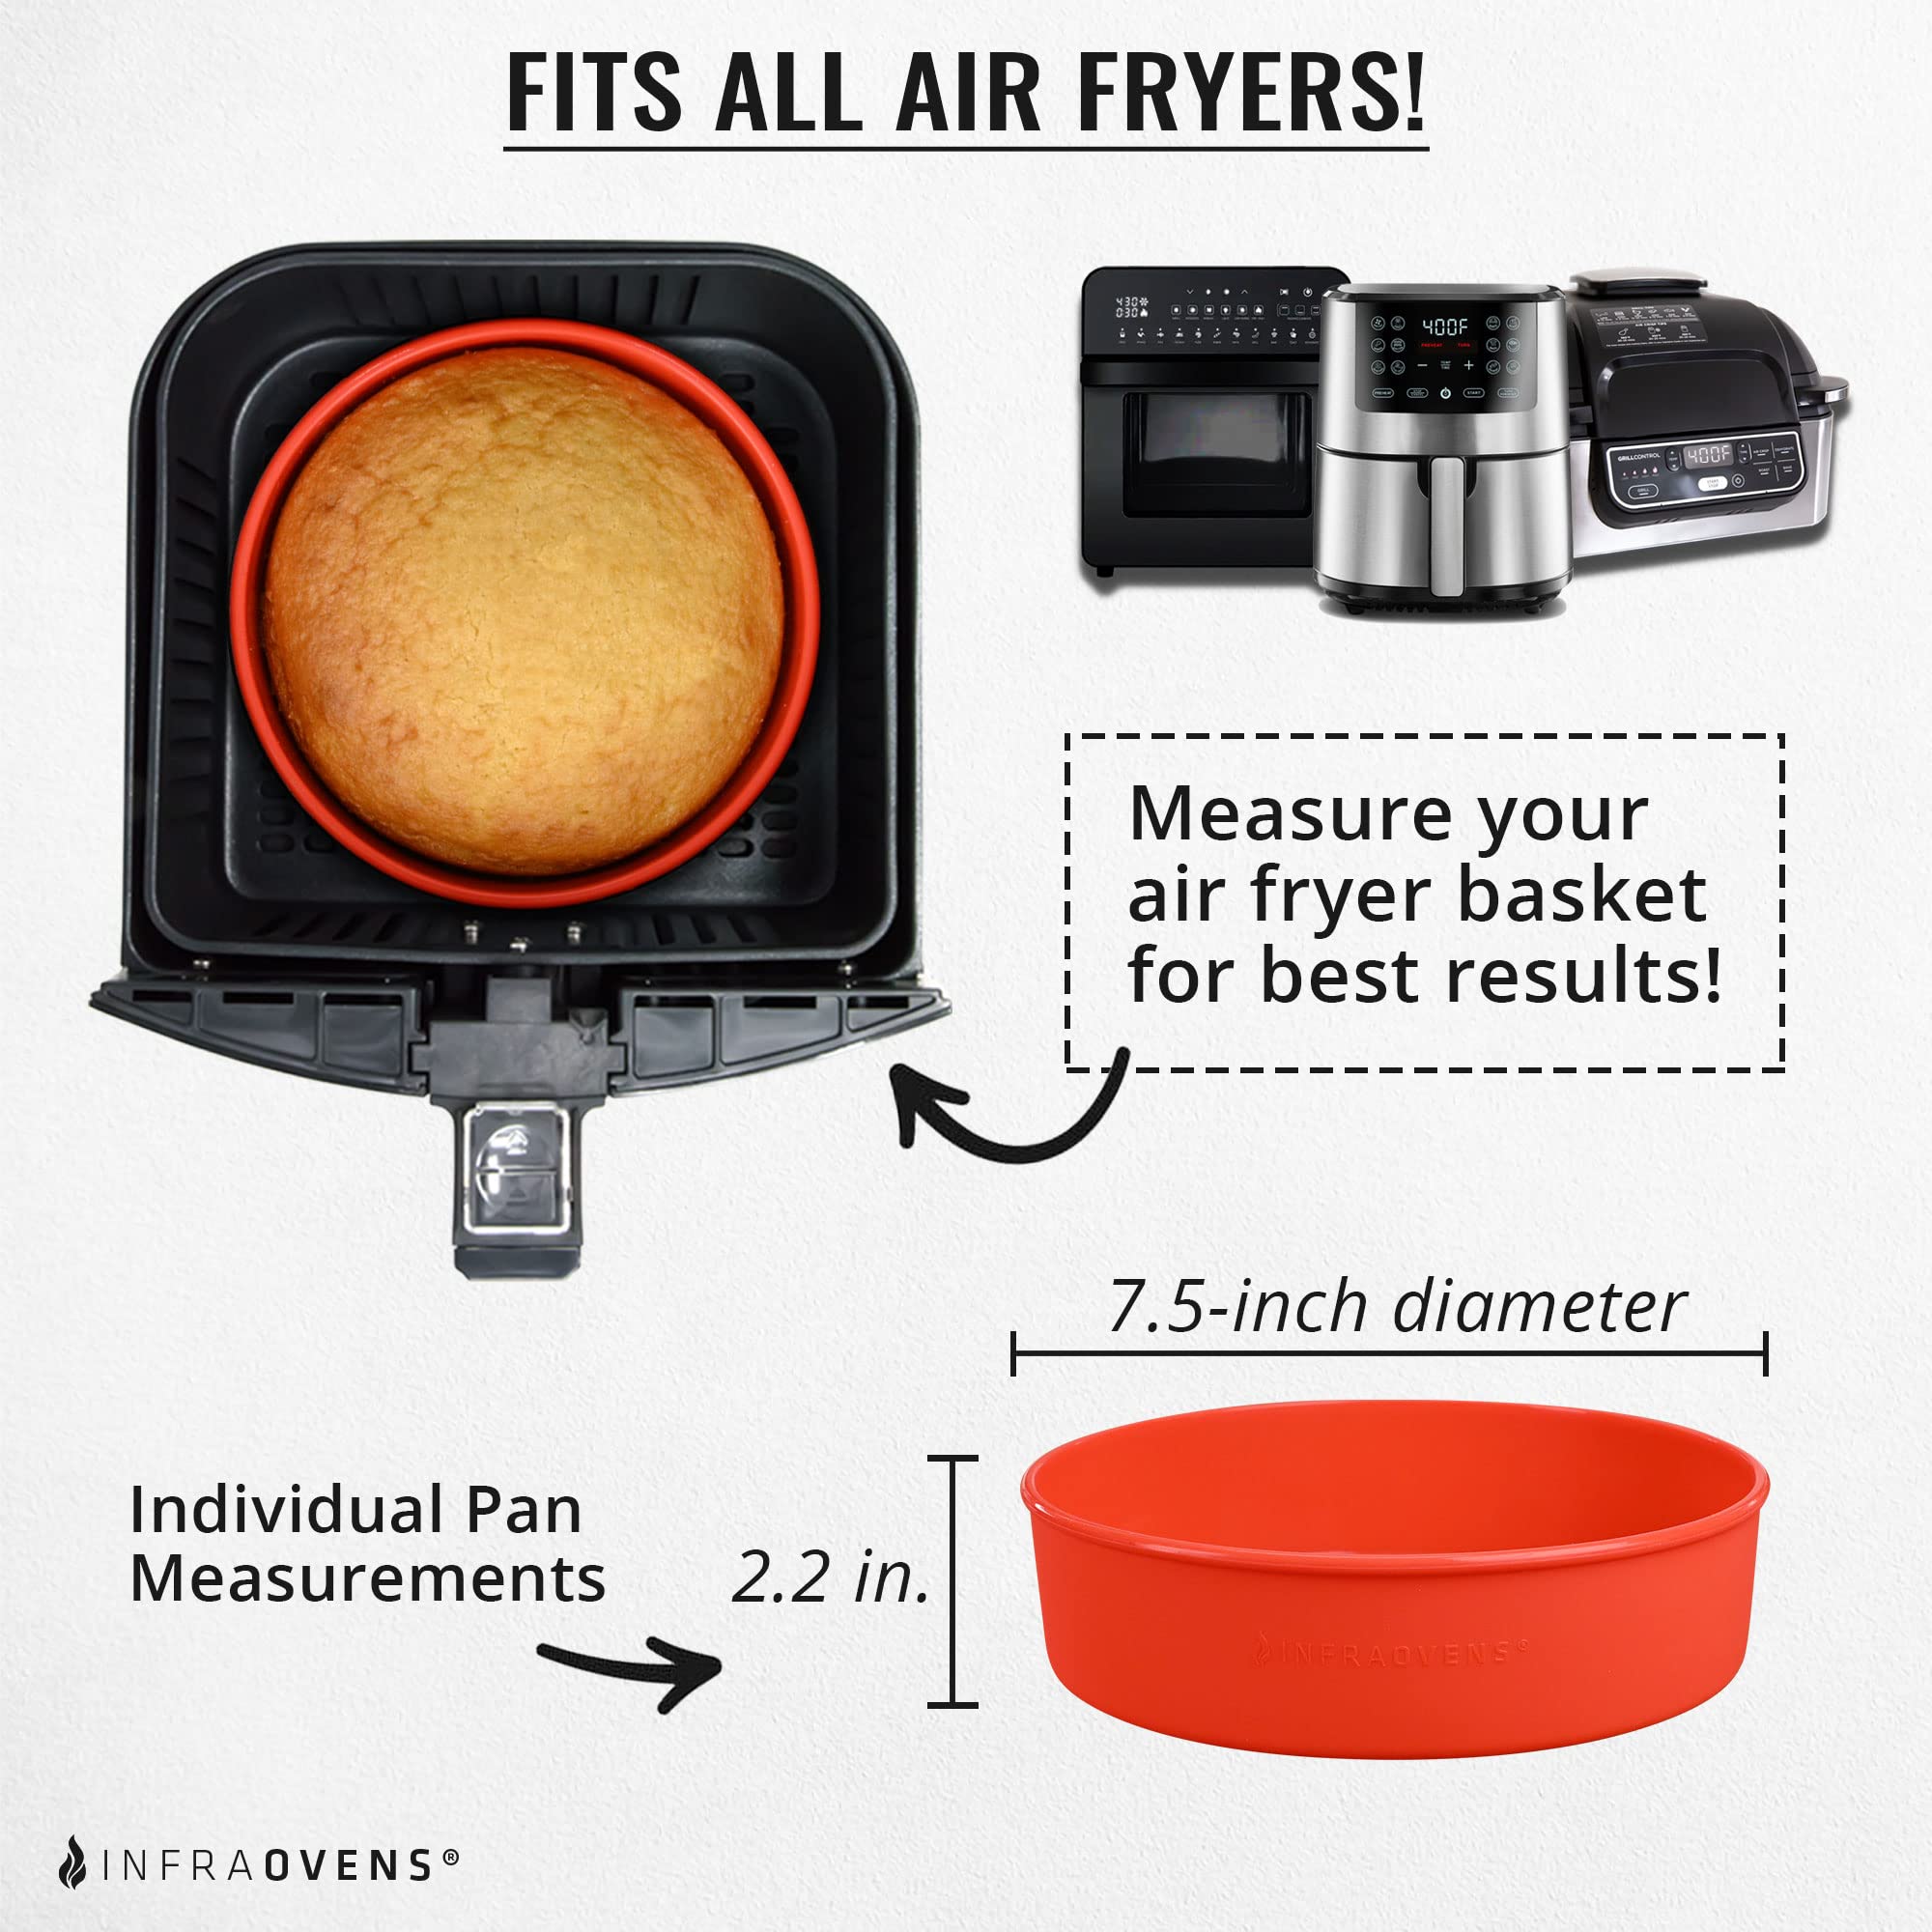 Air Fryer Silicone Cake Pans for Baking, 7.5 inch Large Airfryer Bakeware Set with Muffin Cups, Scrapers, Magnetic Conversion Chart, Fits Ninja, Instant Pot, Chefman, Dash, BPA Free